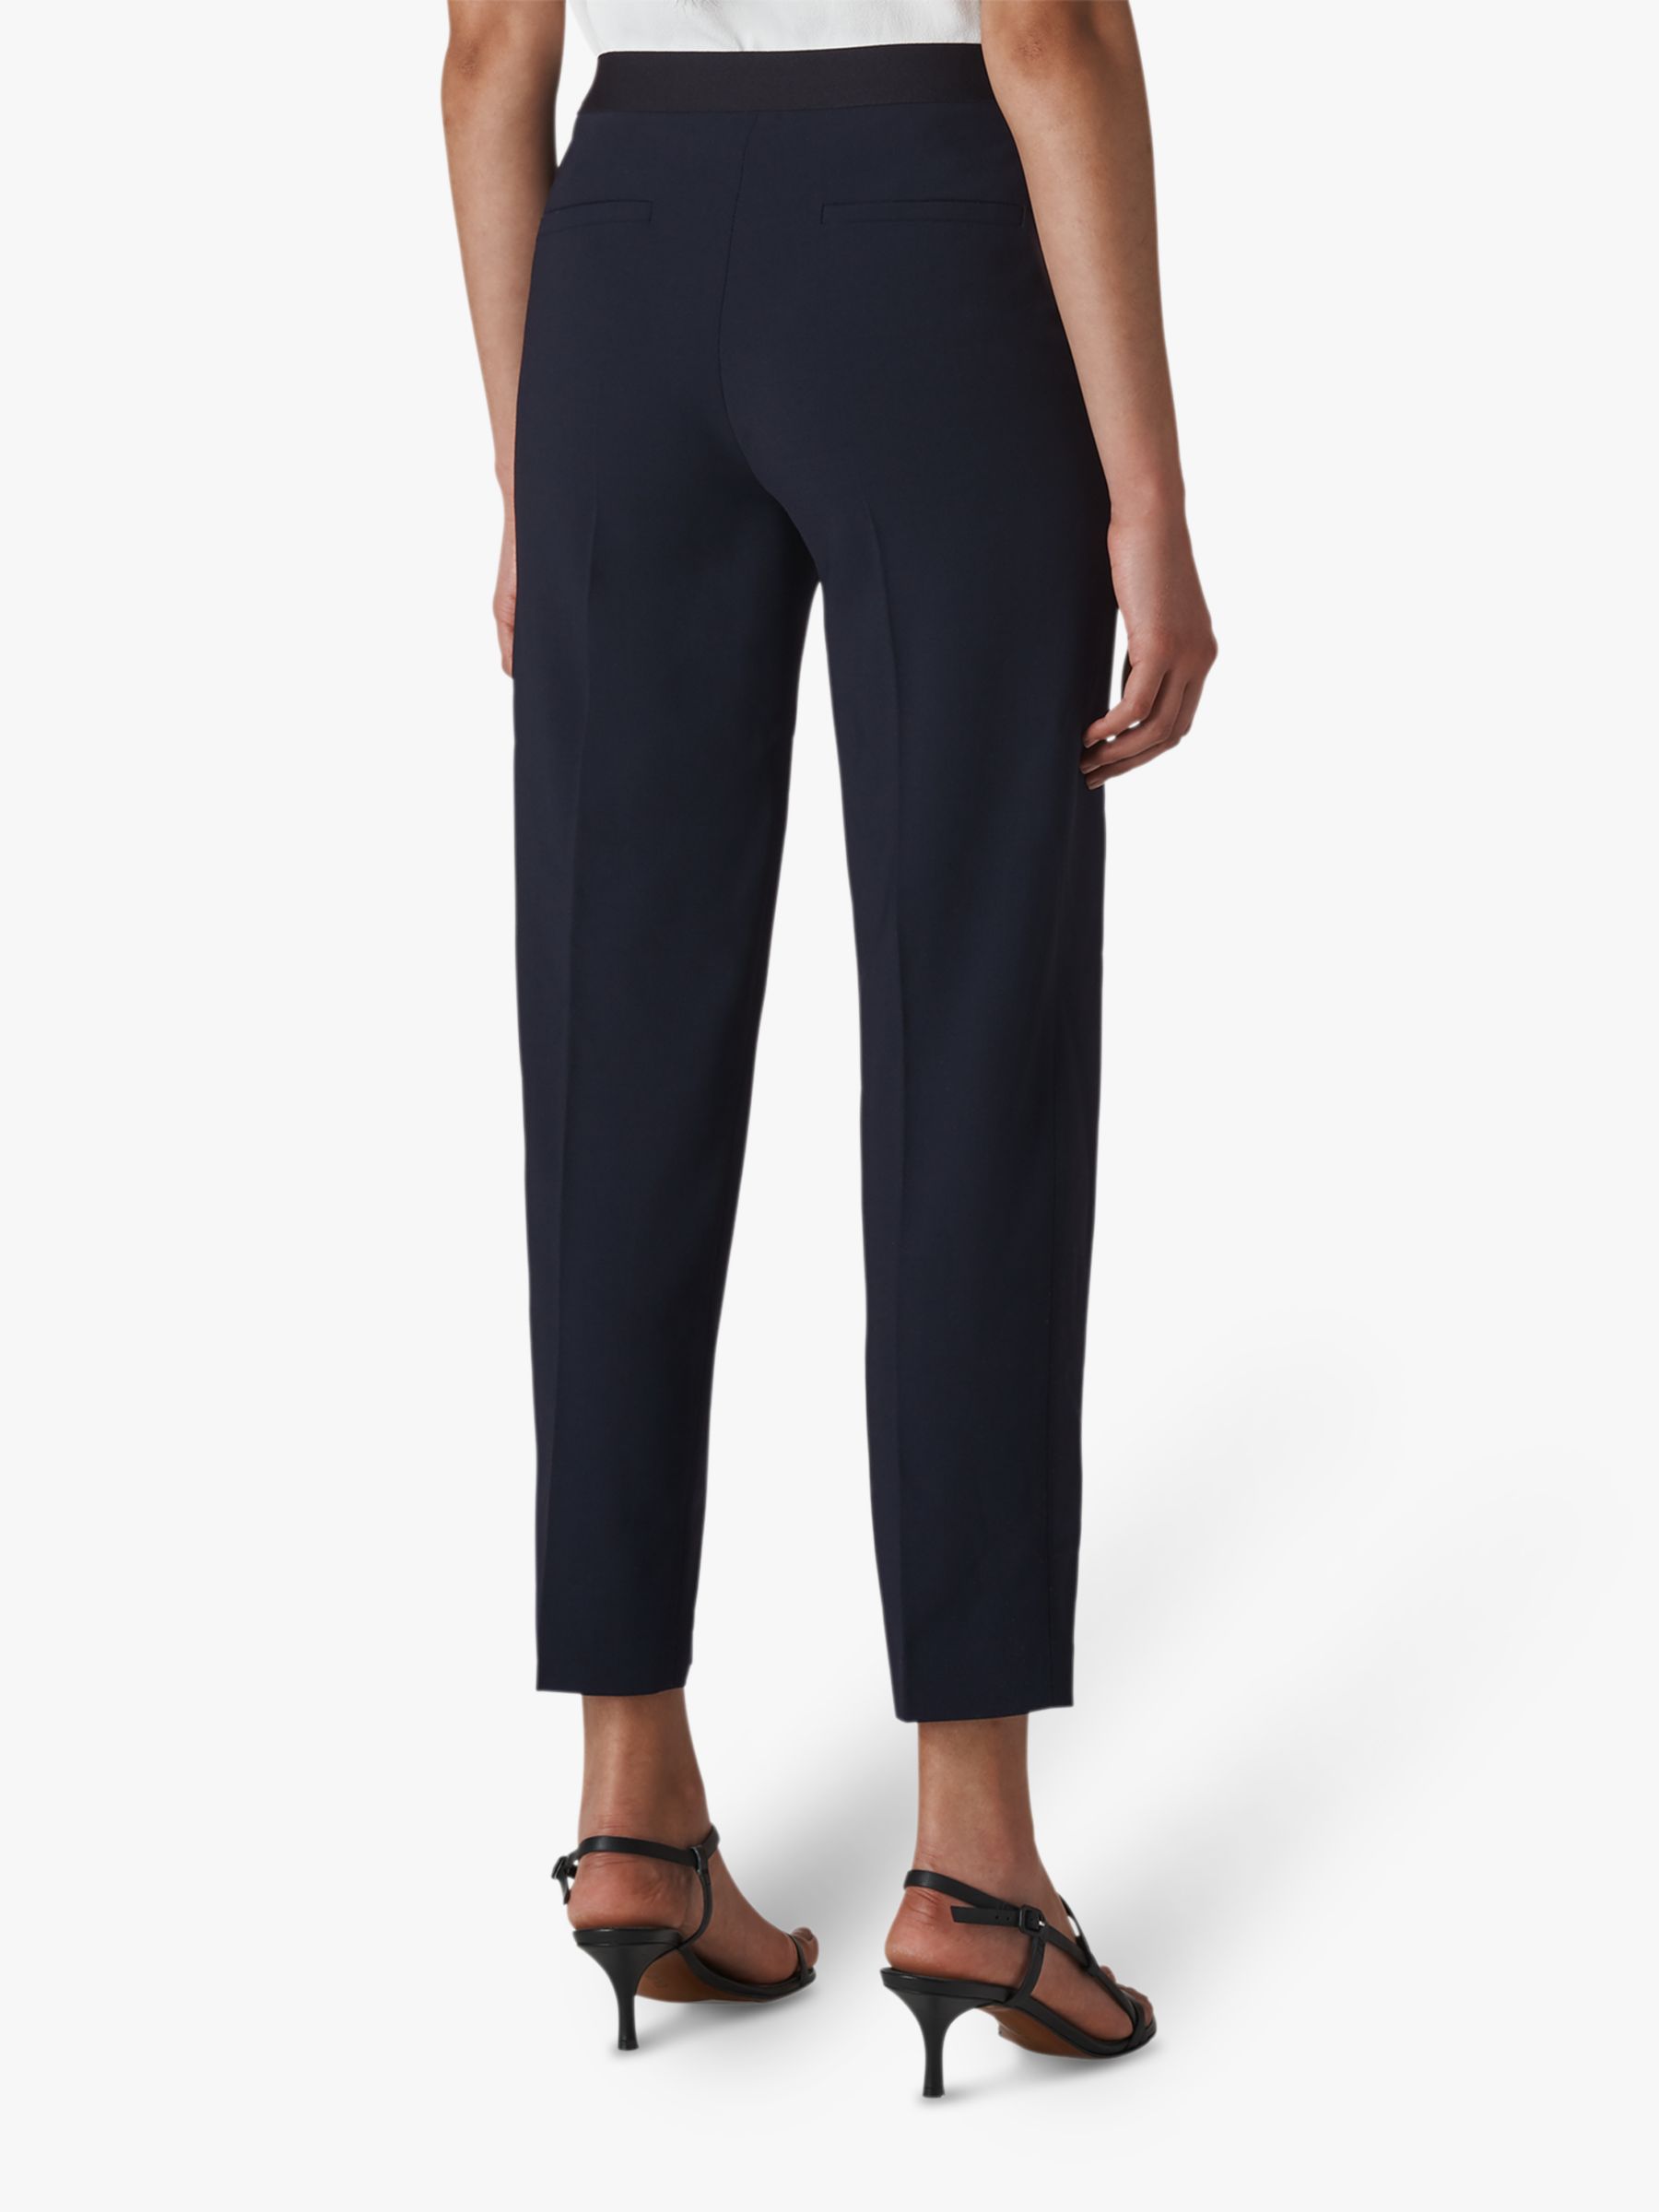 Whistles Anna Elasticated Waist Trousers, Navy